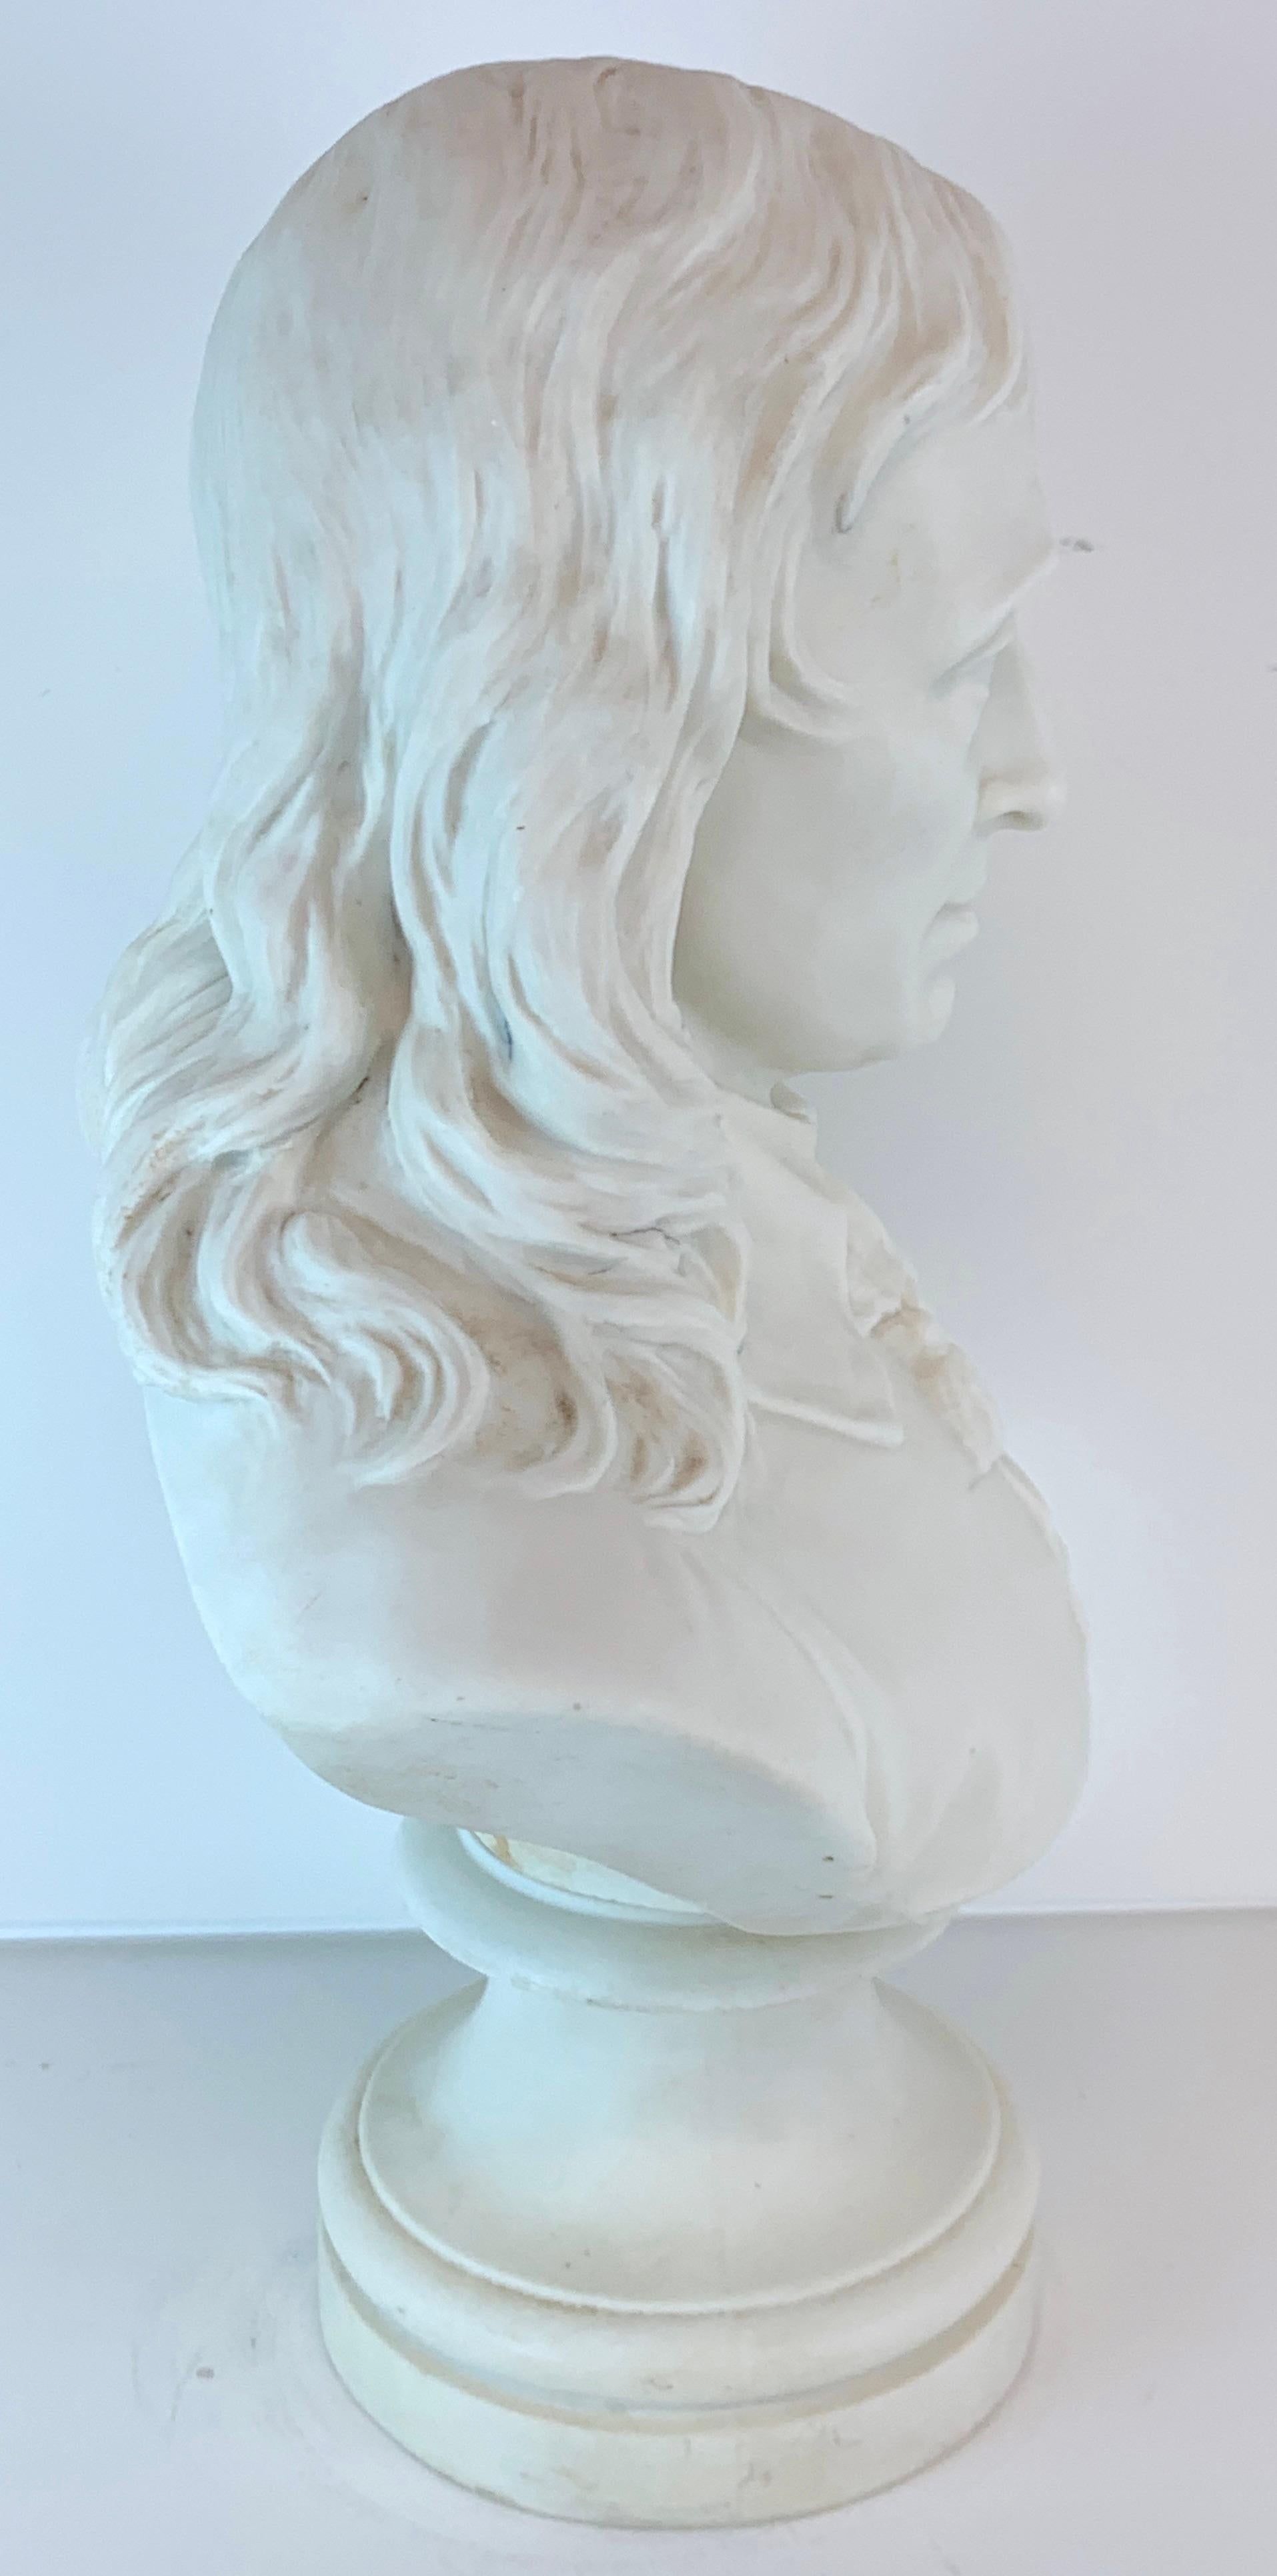 Neoclassical Copeland Parian Bust of John Milton, Made for the 1861 Crystal Palace Exhibition